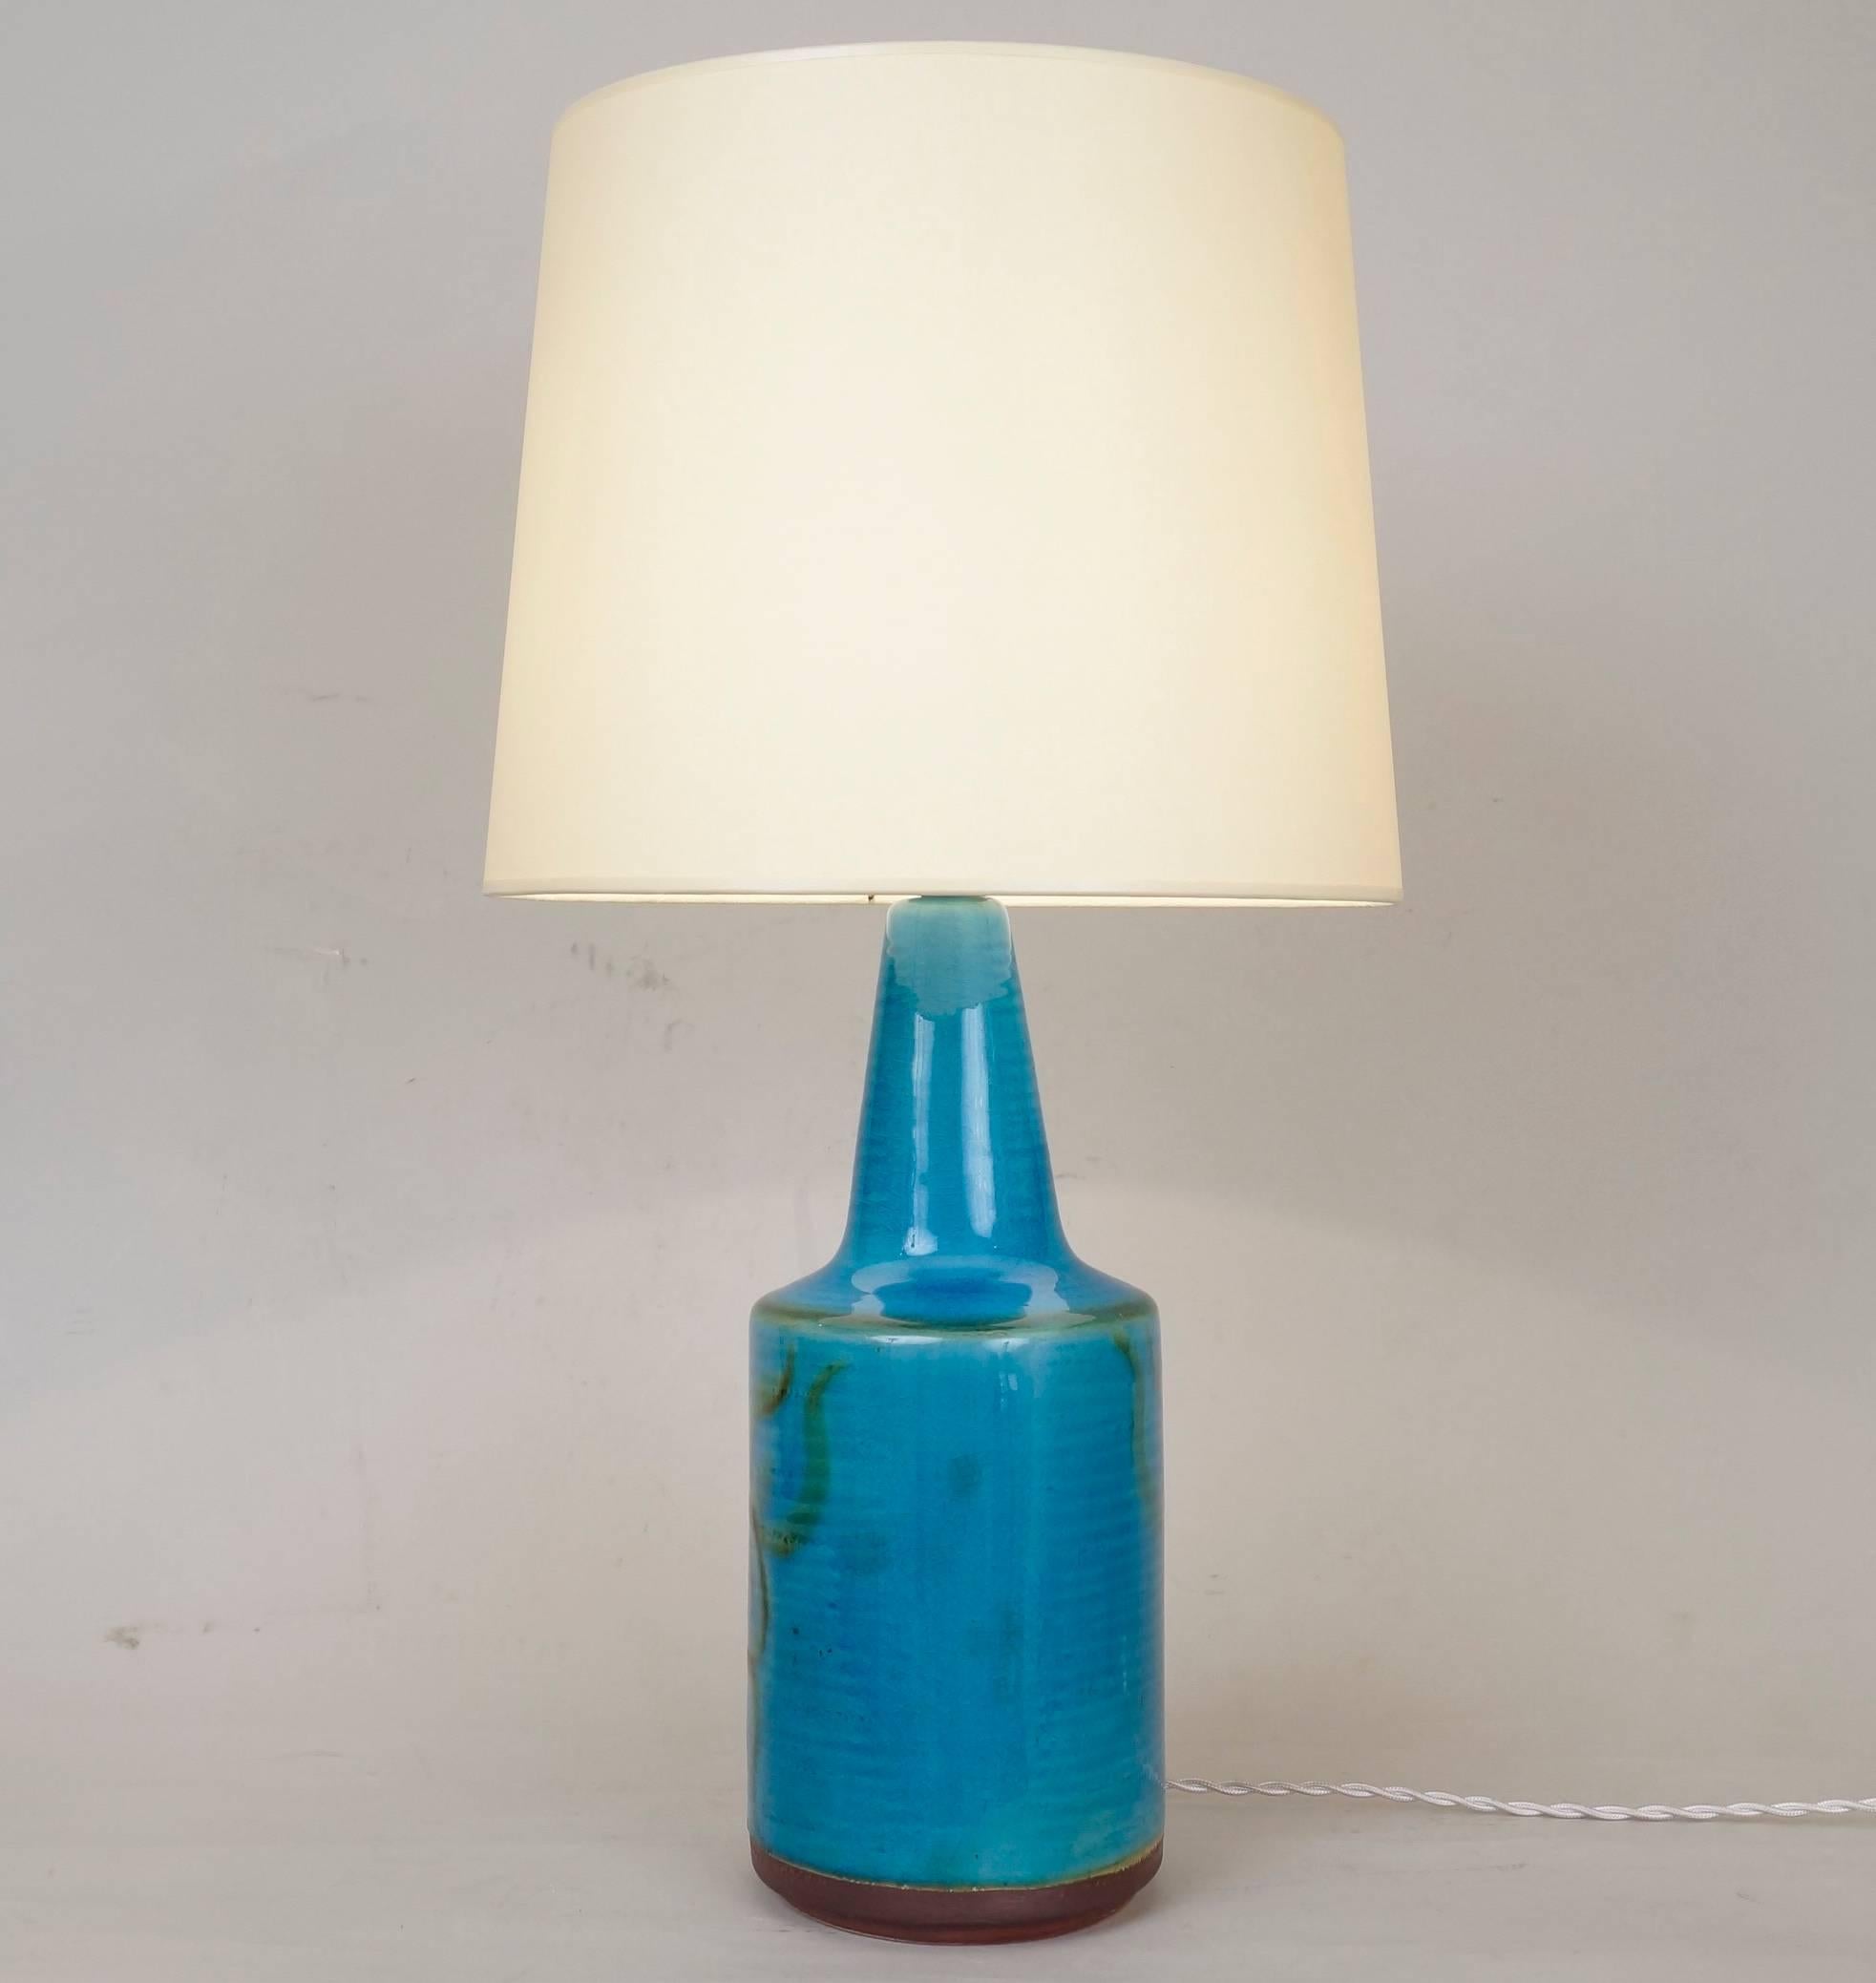 Blue enameled ceramic table lamp
custom-made lampshade.
Rewired with twisted silk cord.
US plug on request.
Measures: Ceramic height 30 cm - 11.8 in.
Height with lampshade 53 cm - 20.9 in.

    